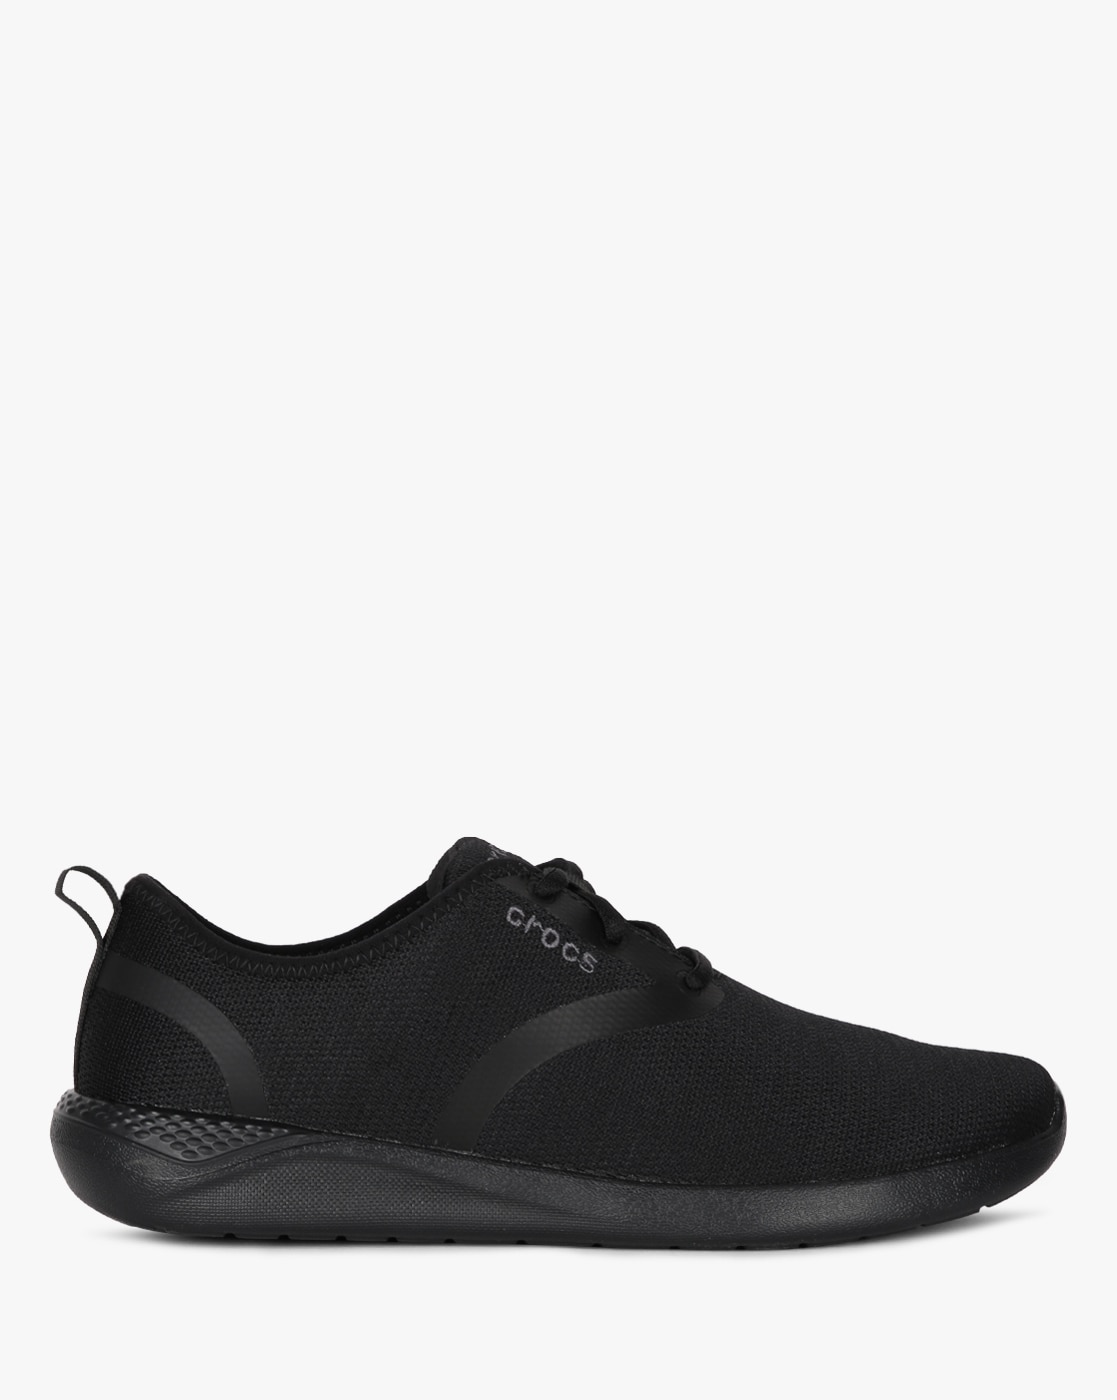 Buy Black Casual Shoes for Men by CROCS 